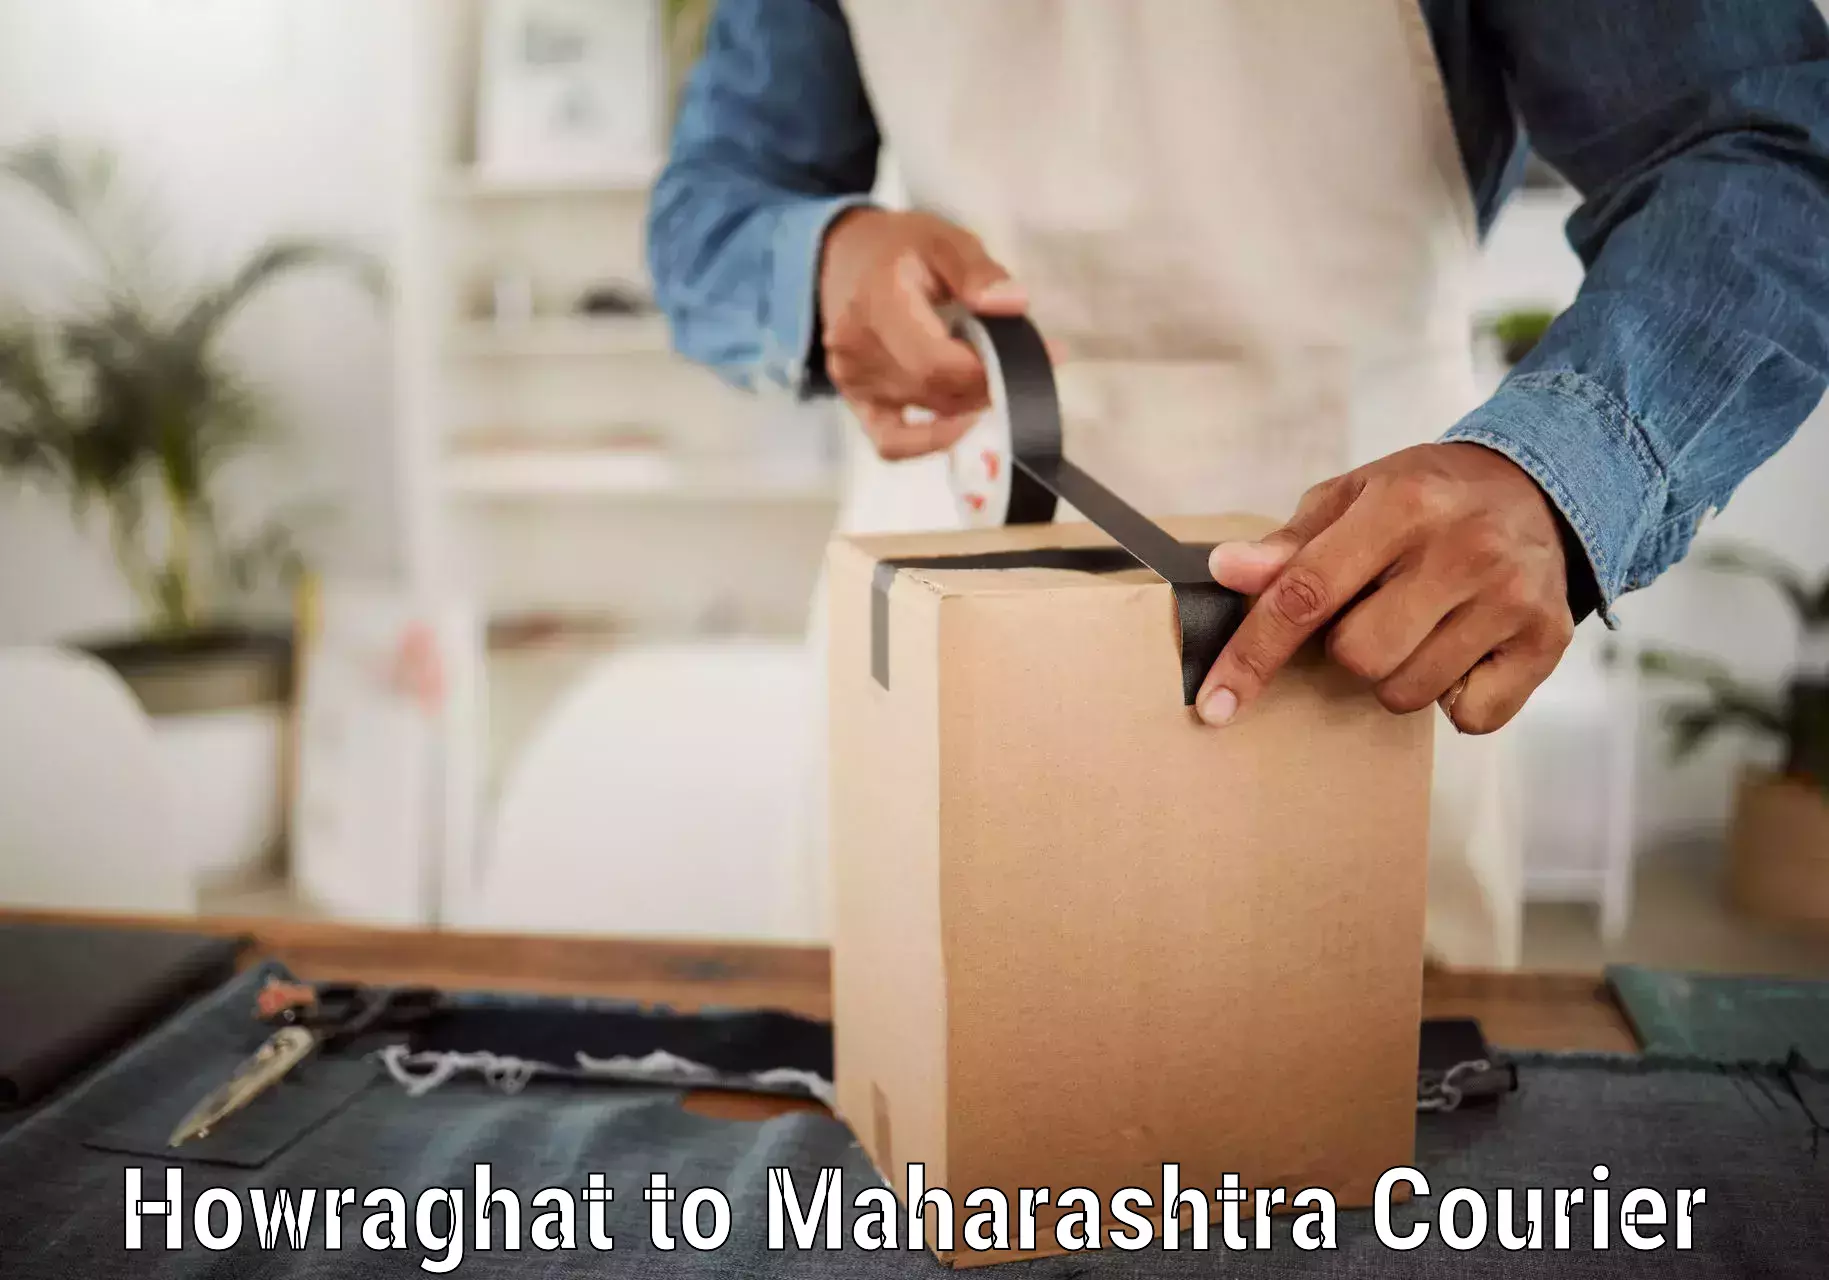 Full-service courier options Howraghat to Kale Kolhapur